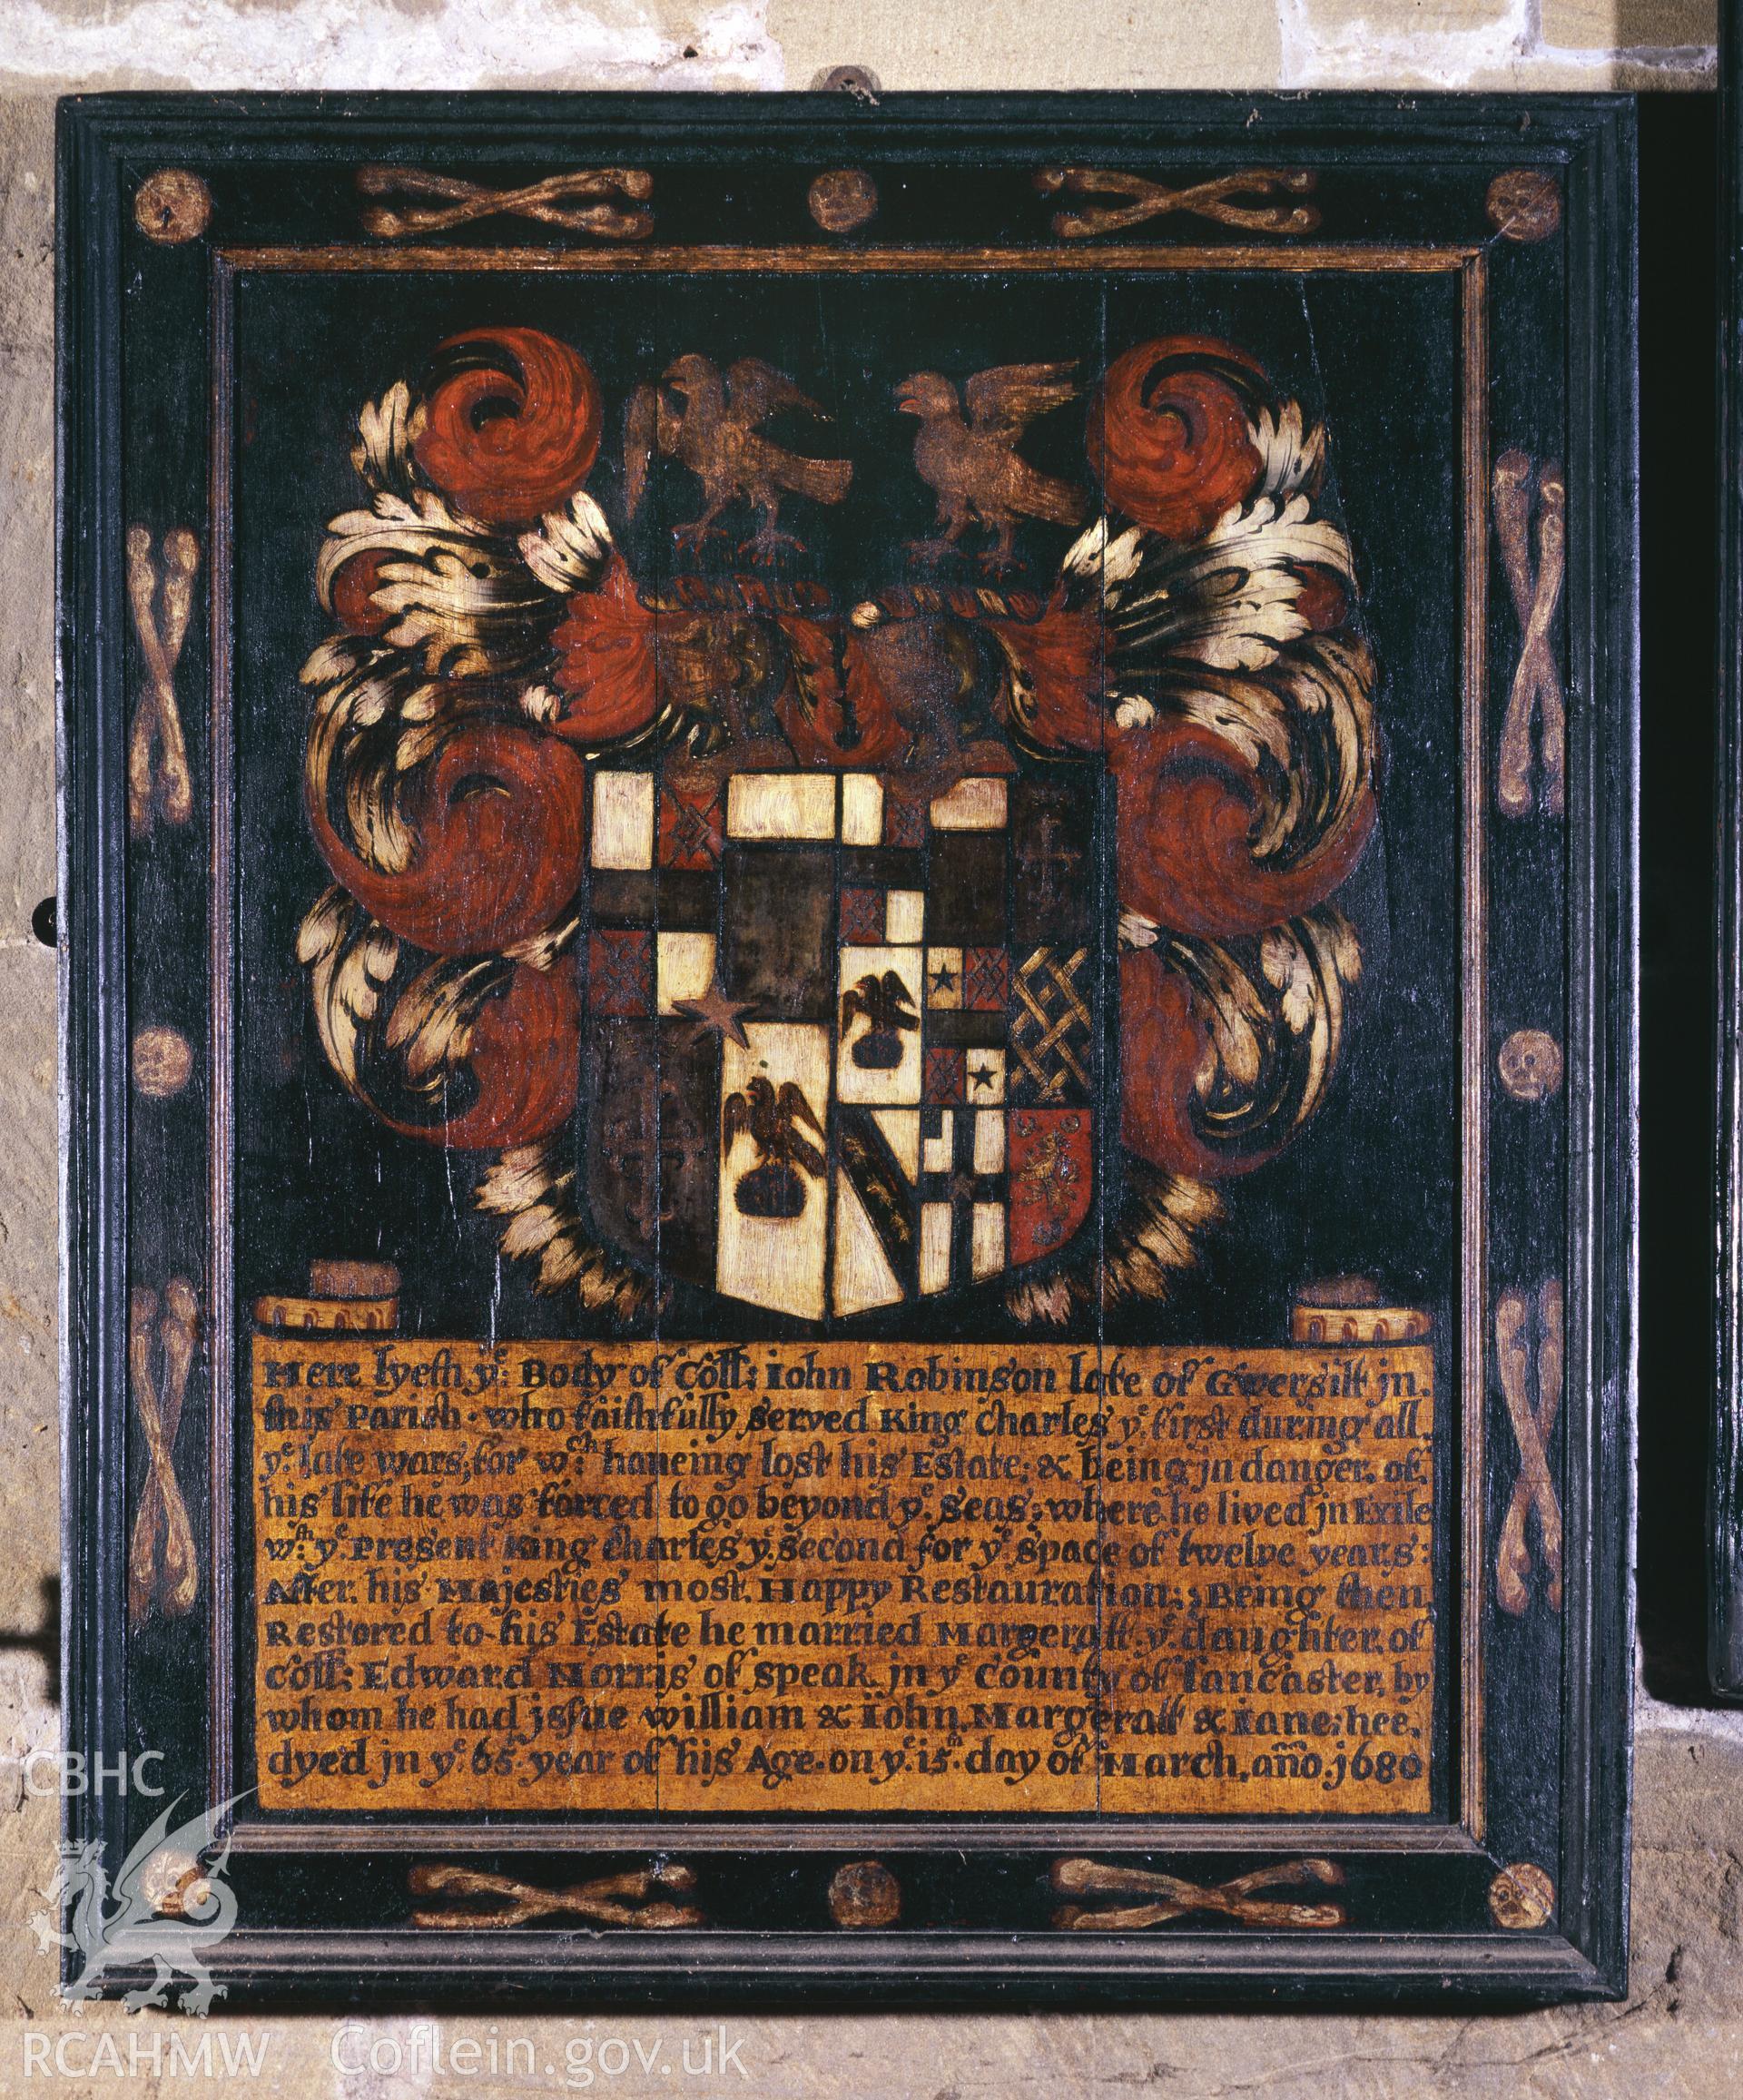 RCAHMW colour transparency showing memorial to Colonel John Robinson in All Saints Church, Gresford, taken by Iain Wright, February 2001.